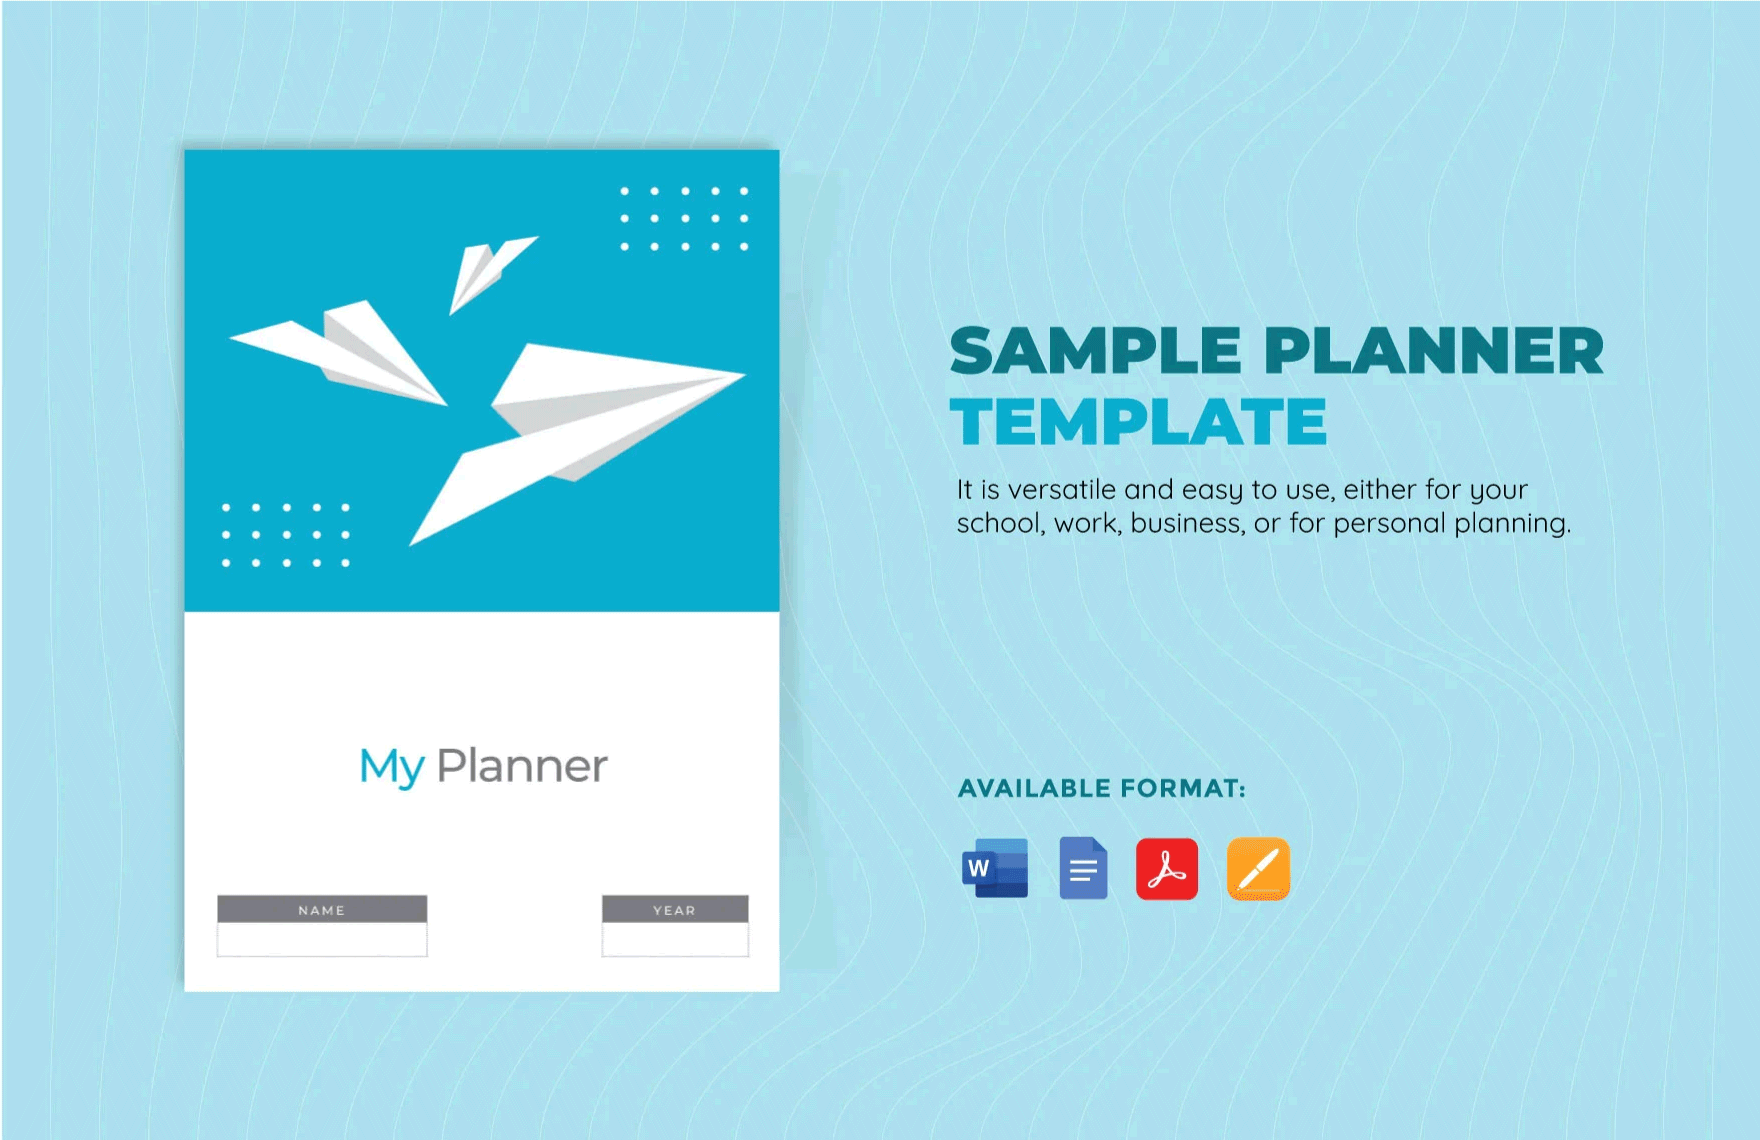 Free Sample Planner Template in Word, Google Docs, PDF, Apple Pages